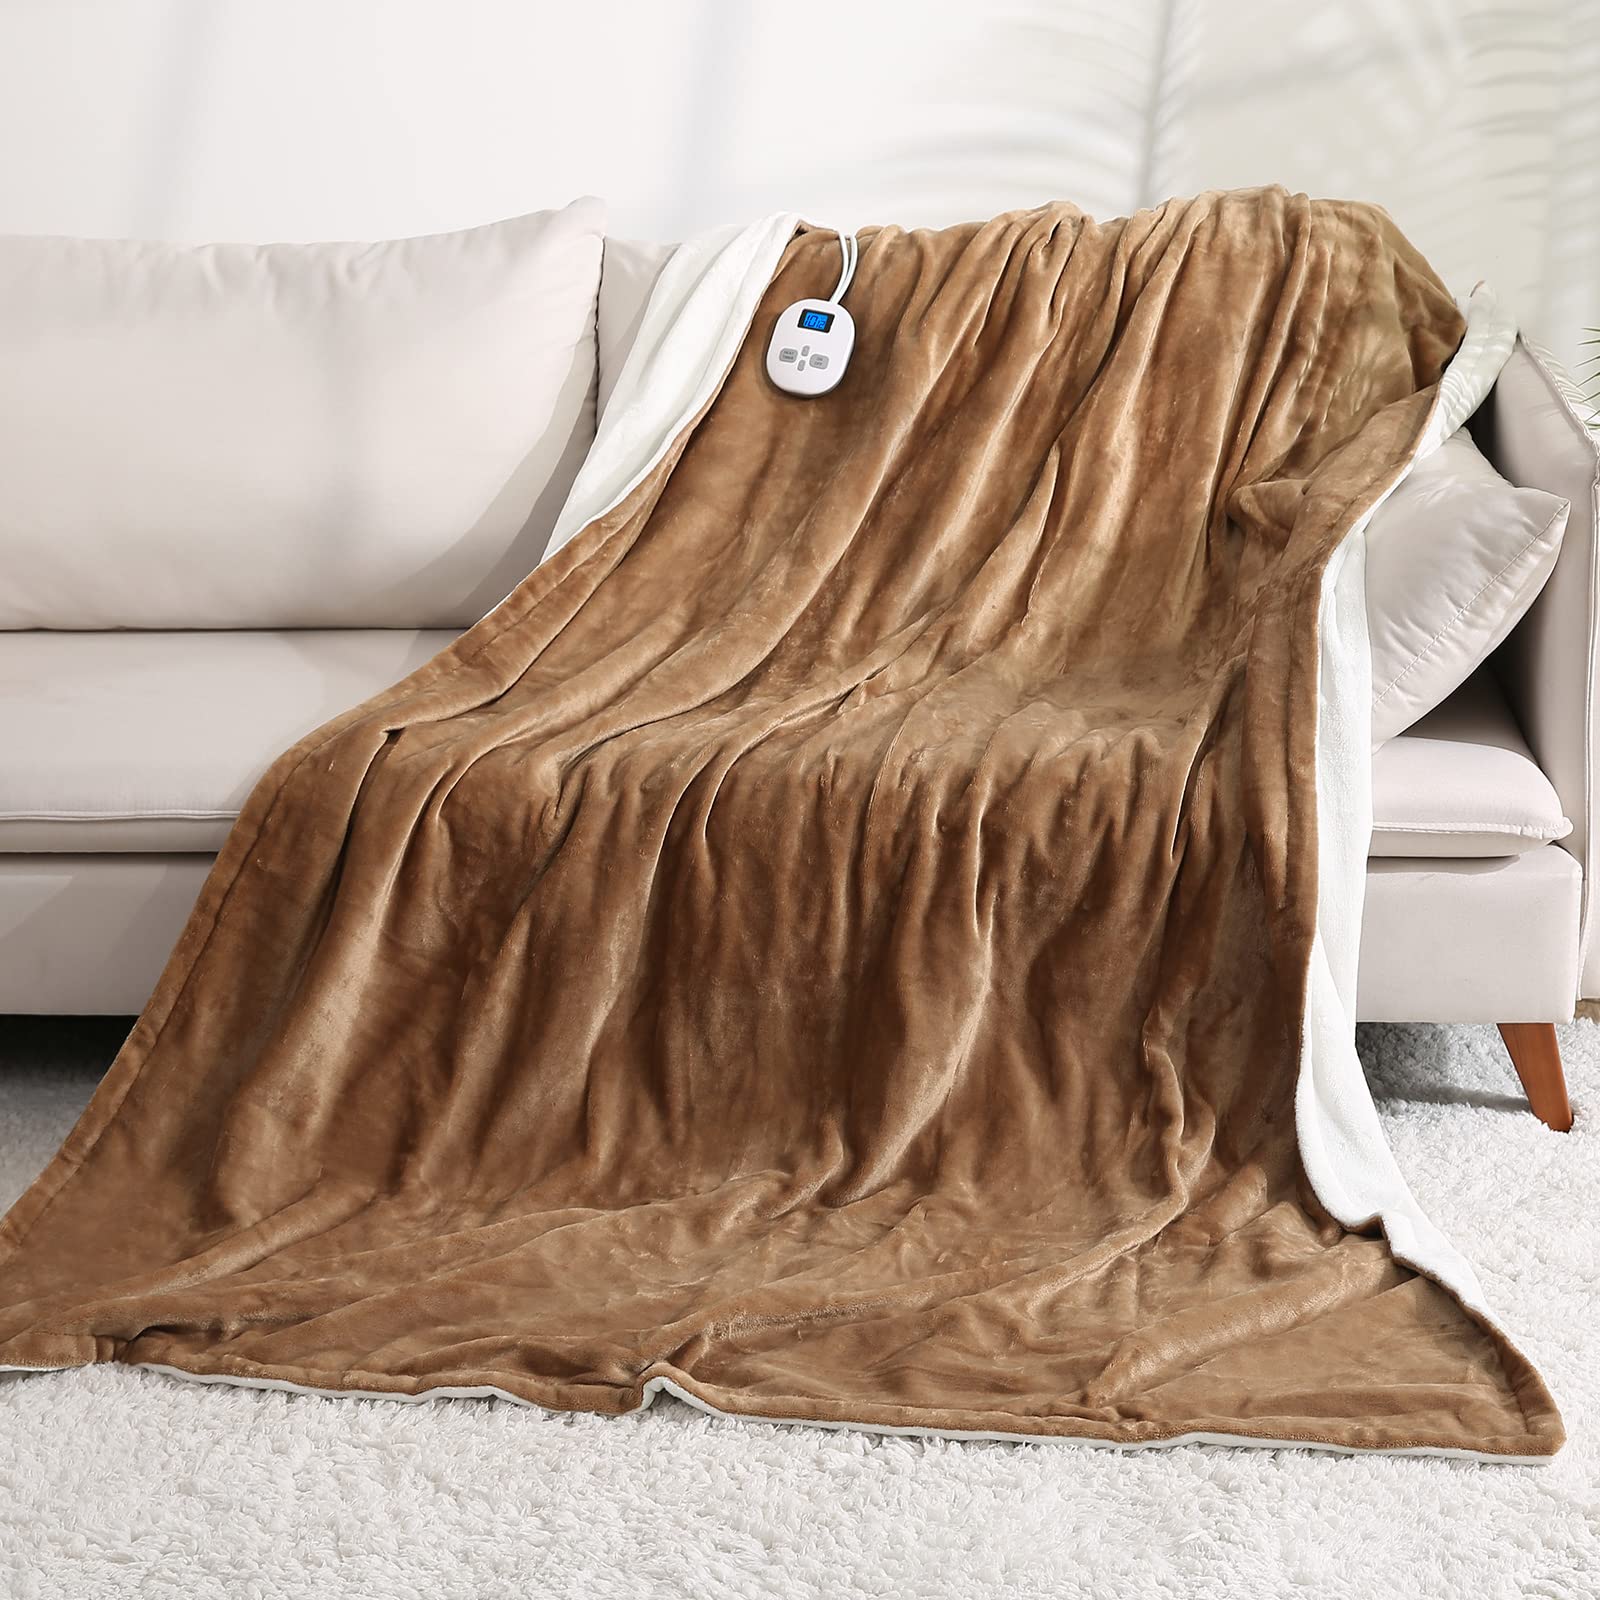 Heated Throw Blanket Large Soft Flannel 150X200cm with 10 Heating Settings & 12 Hours Auto-Off Timer, Machine Washable, Home Office Use - Brown